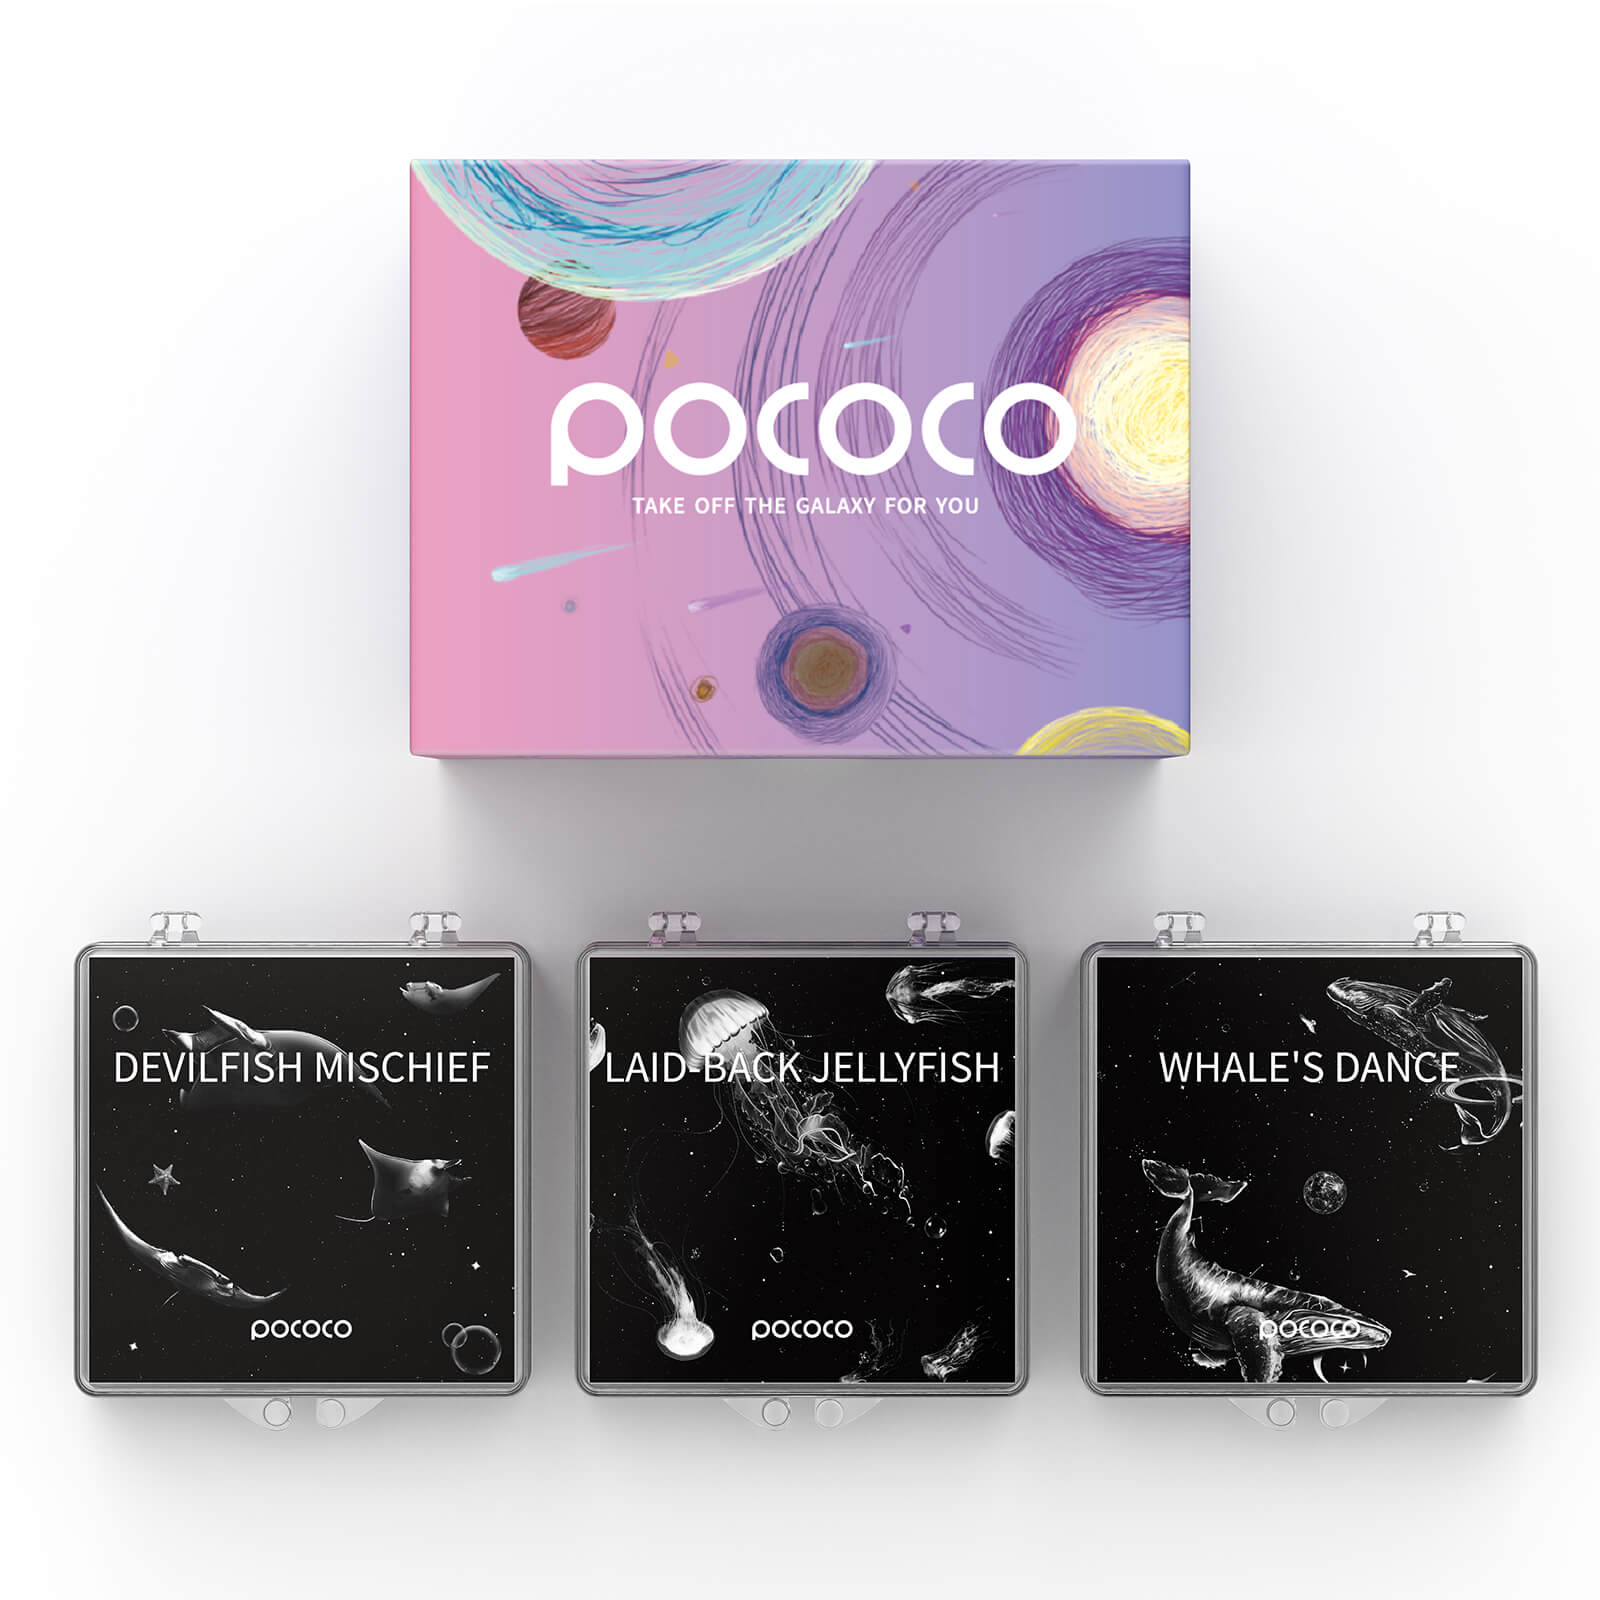  【Limited Time Offer: 16% Off 】POCOCO Galaxy